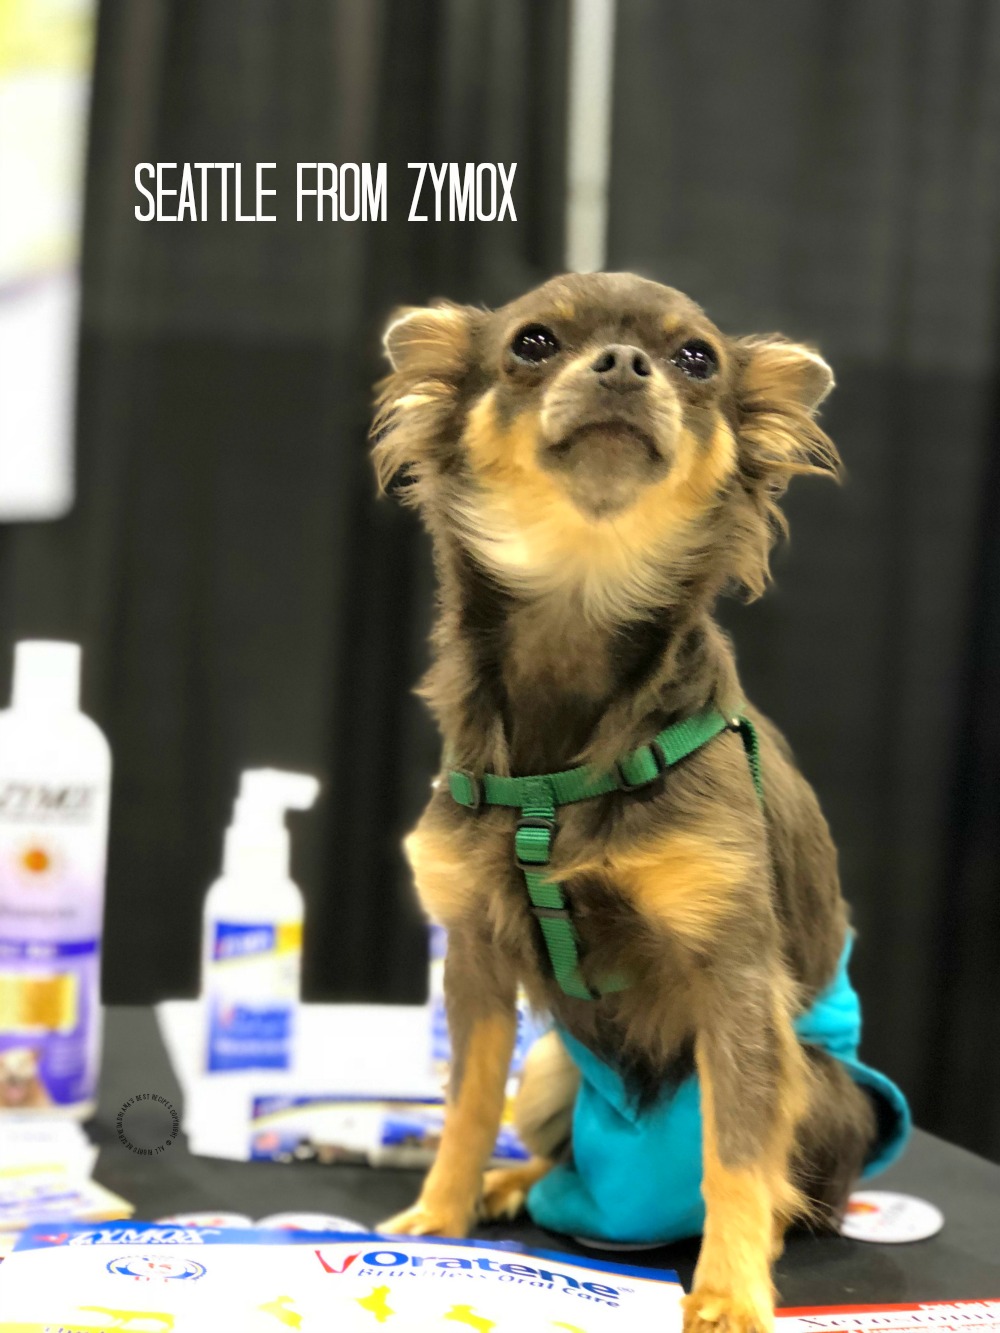 We met with Seattle from family owned ZYMOX at BlogPaws